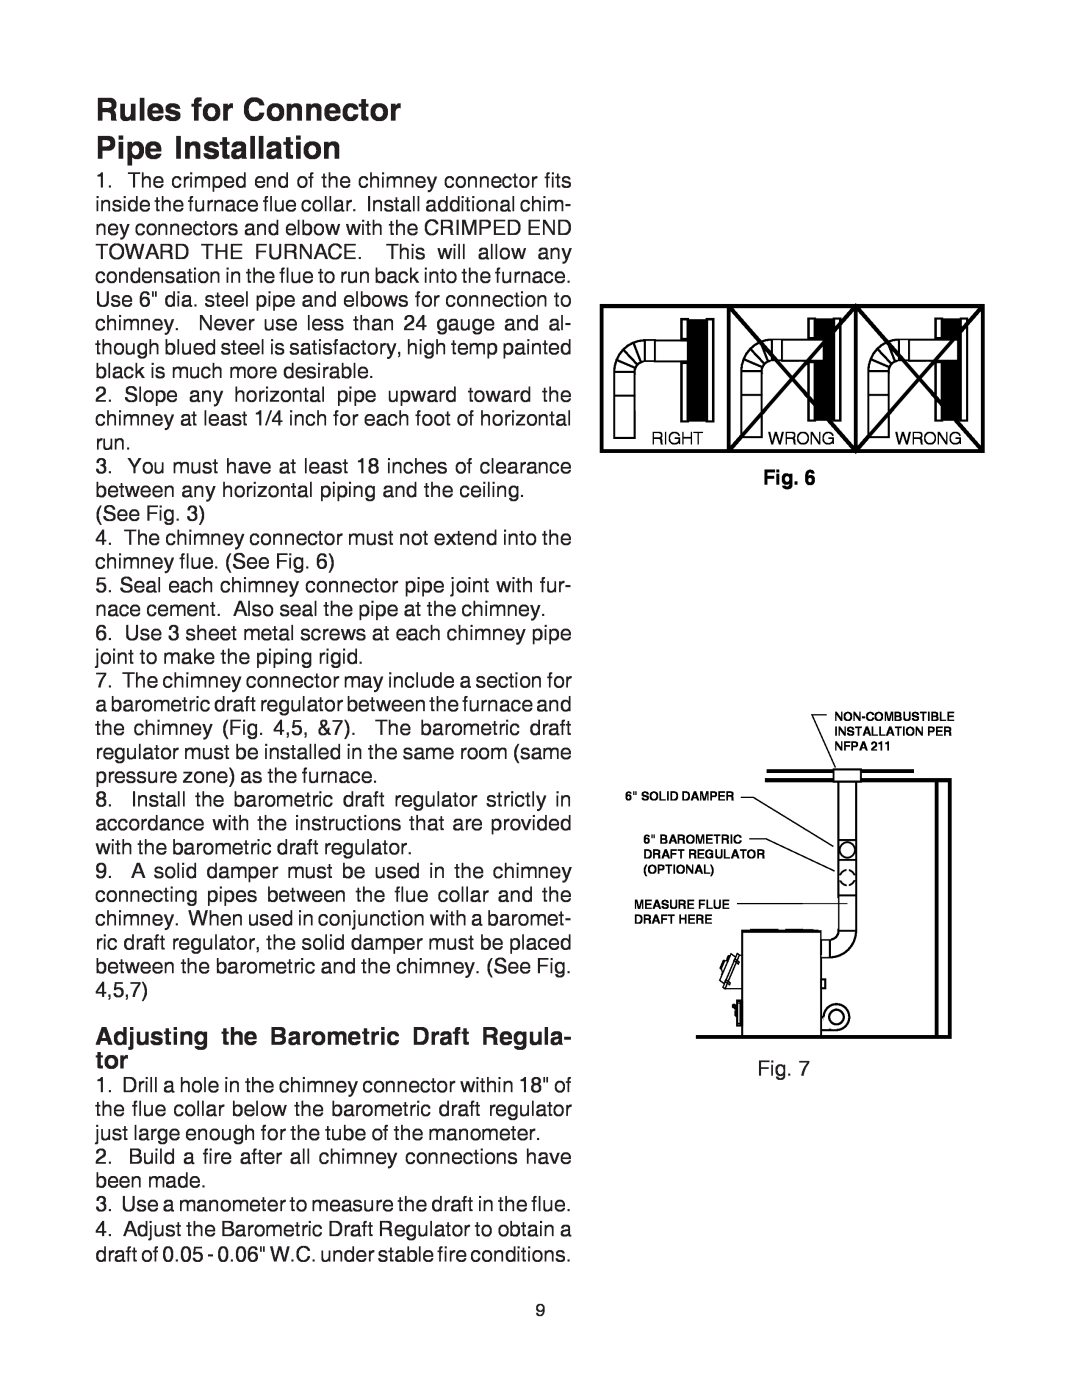 United States Stove 1500 owner manual Rules for Connector Pipe Installation, Adjusting the Barometric Draft Regula- tor 